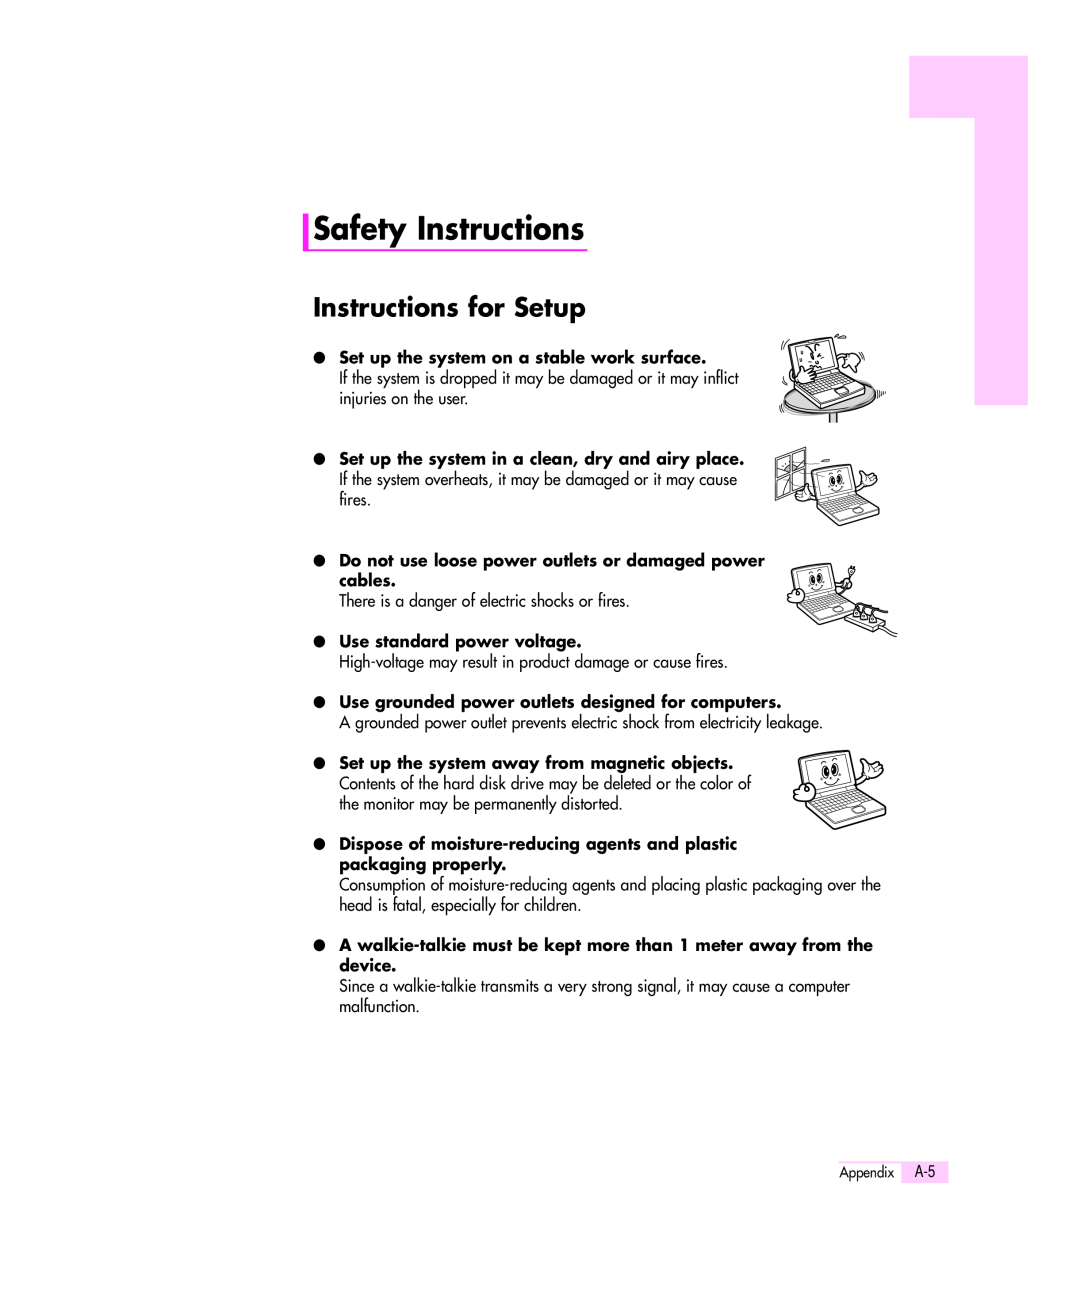 Samsung Q35 manual Safety Instructions, Instructions for Setup, Set up the system on a stable work surface 